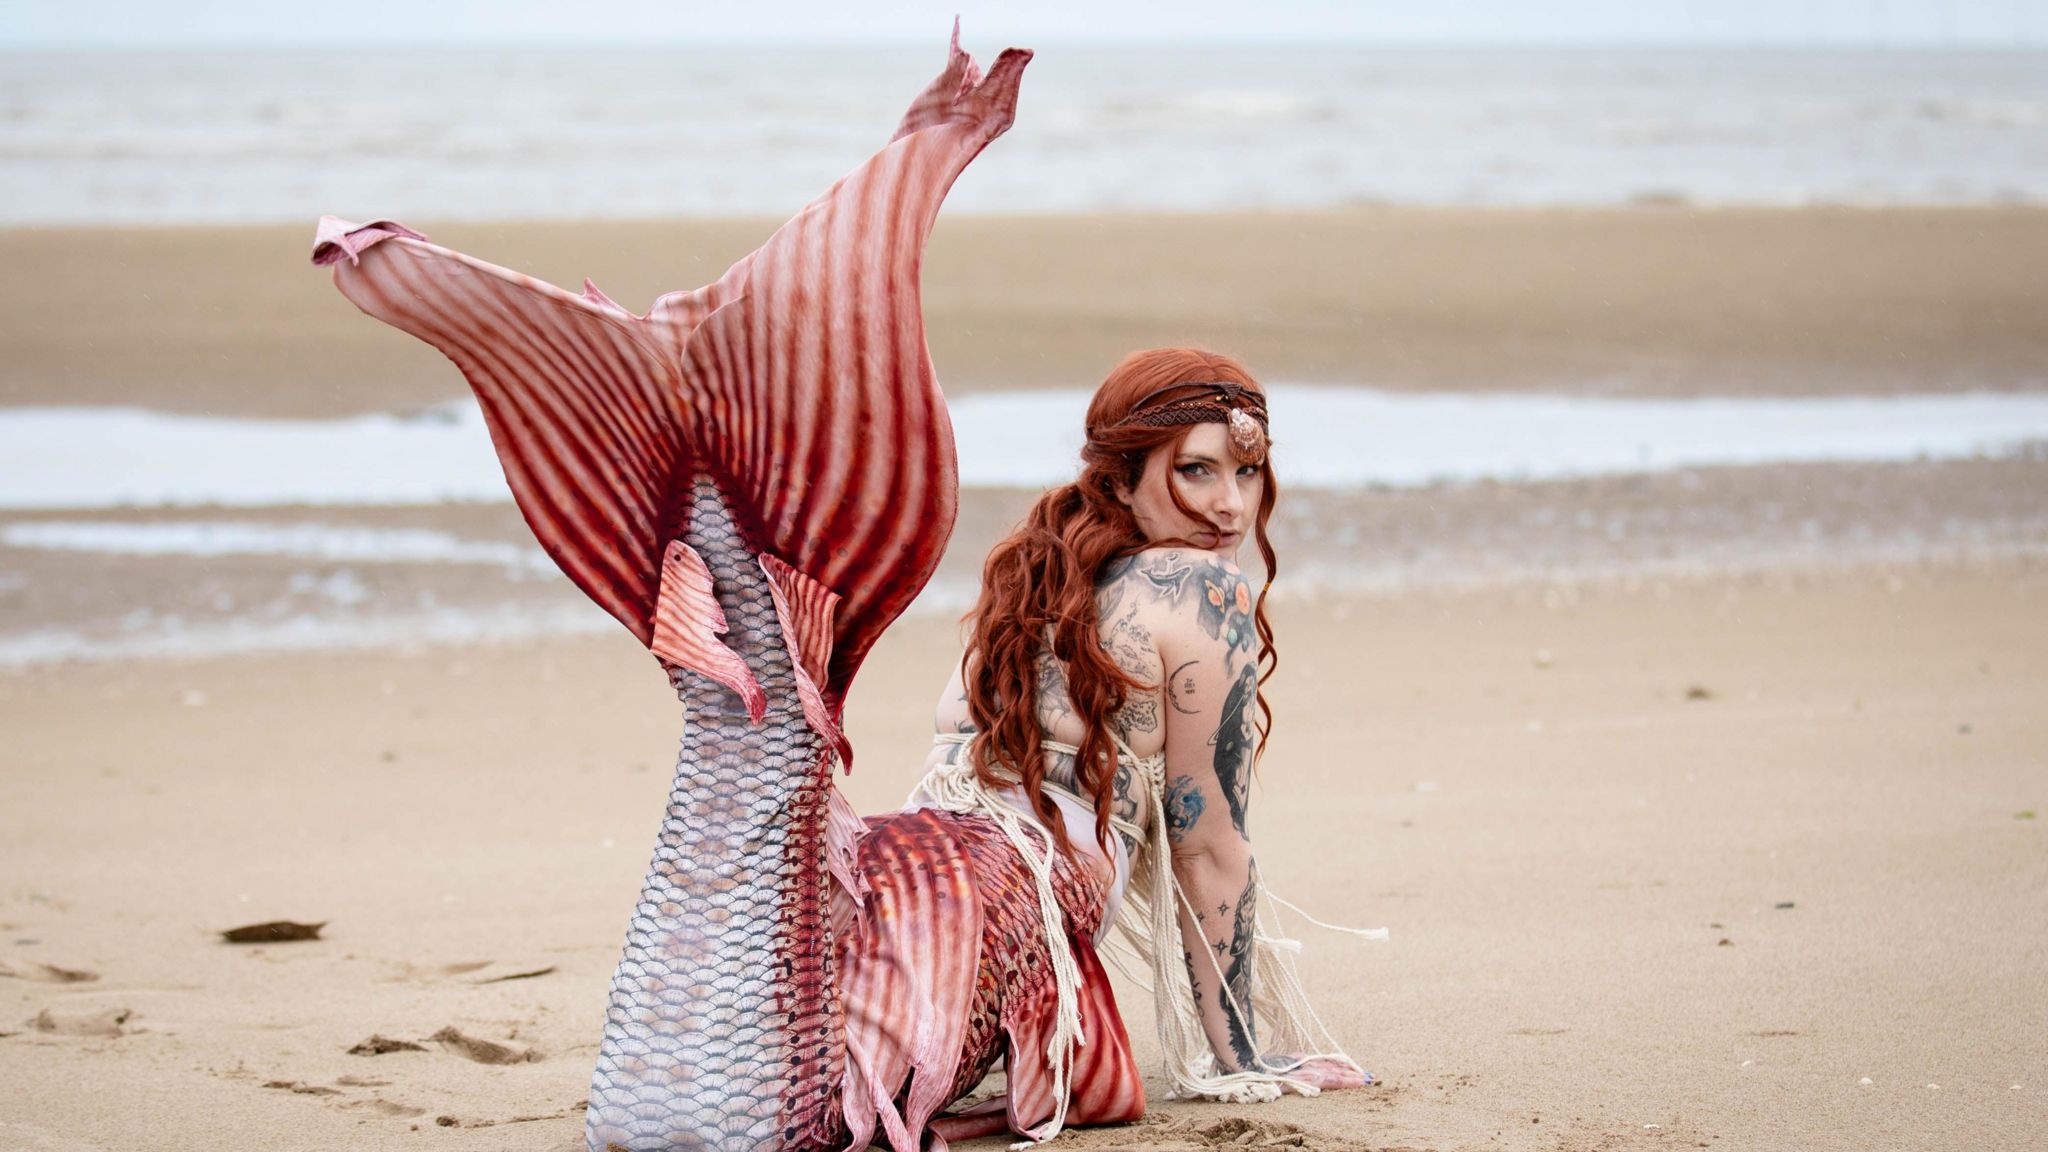 Tyler Turner lying on her front on a sandy beach with a salmon pink, red and white scaled tale on her legs with a matching red wig on her head. The tail is lifted up to the sky and Tyler is looking at the camera. 